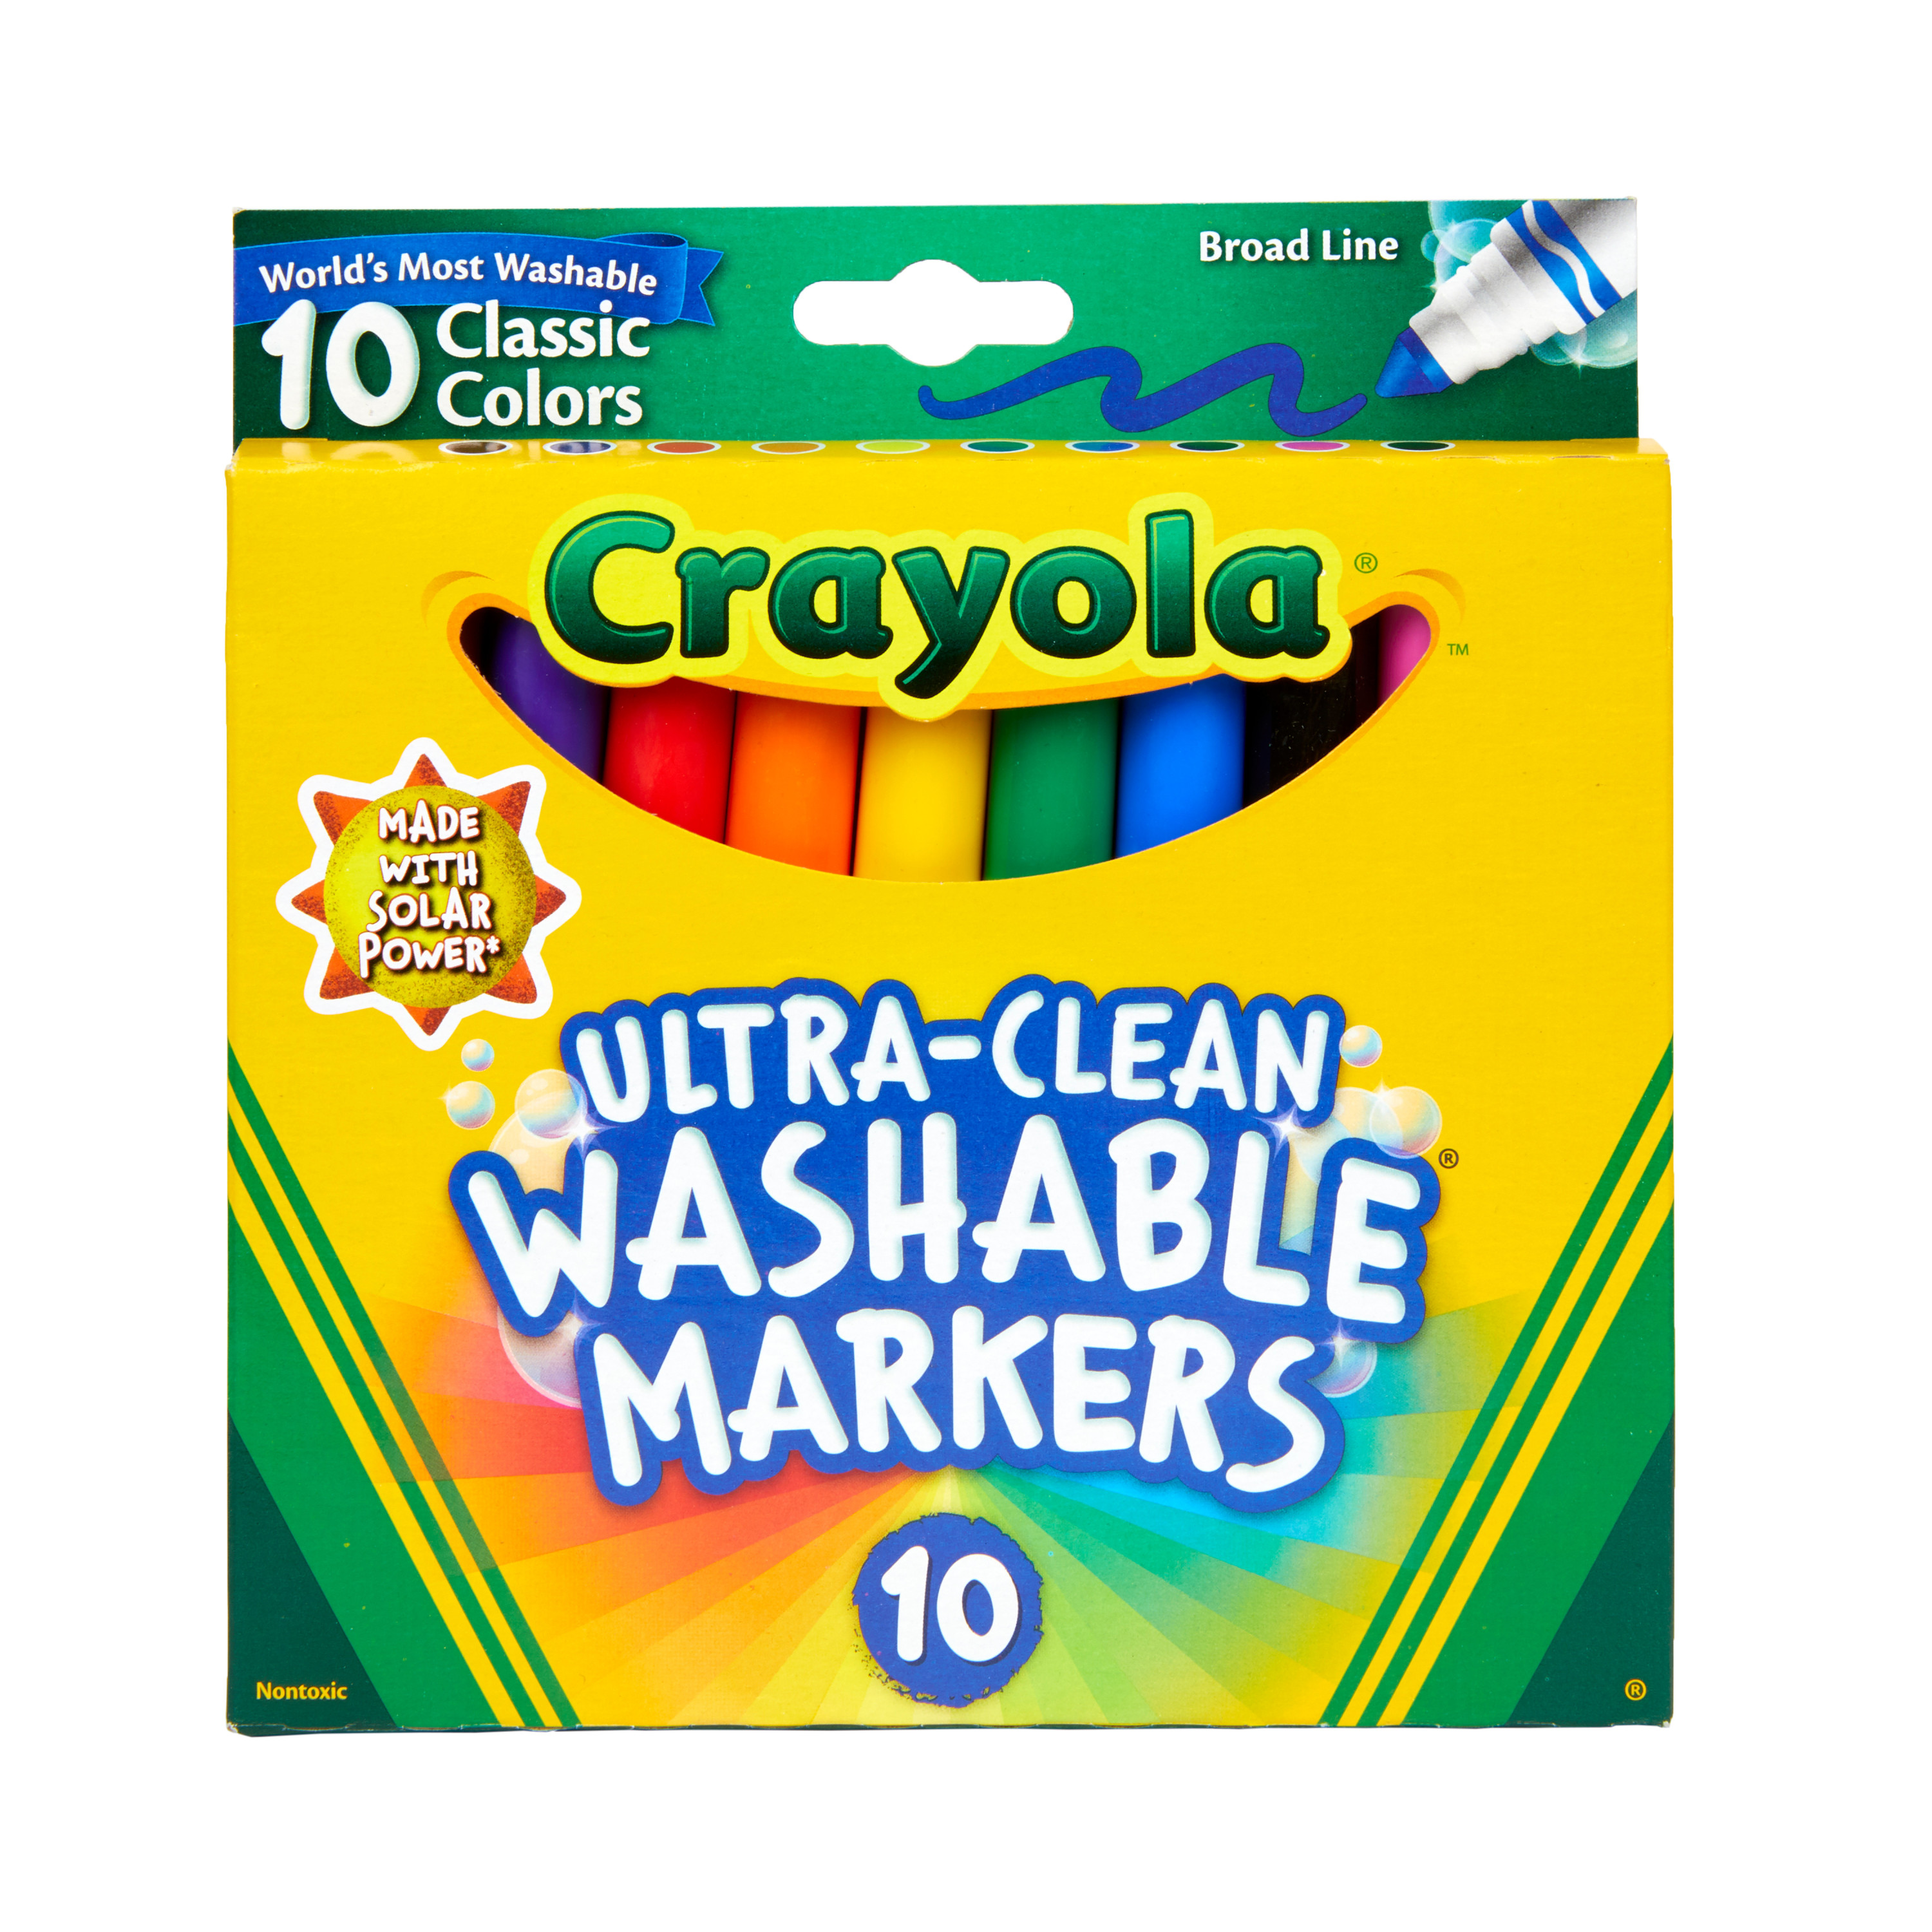 Crayola Ultra-Clean Washable Broad Line Markers, School & Art Supplies, 10 Ct - image 9 of 9